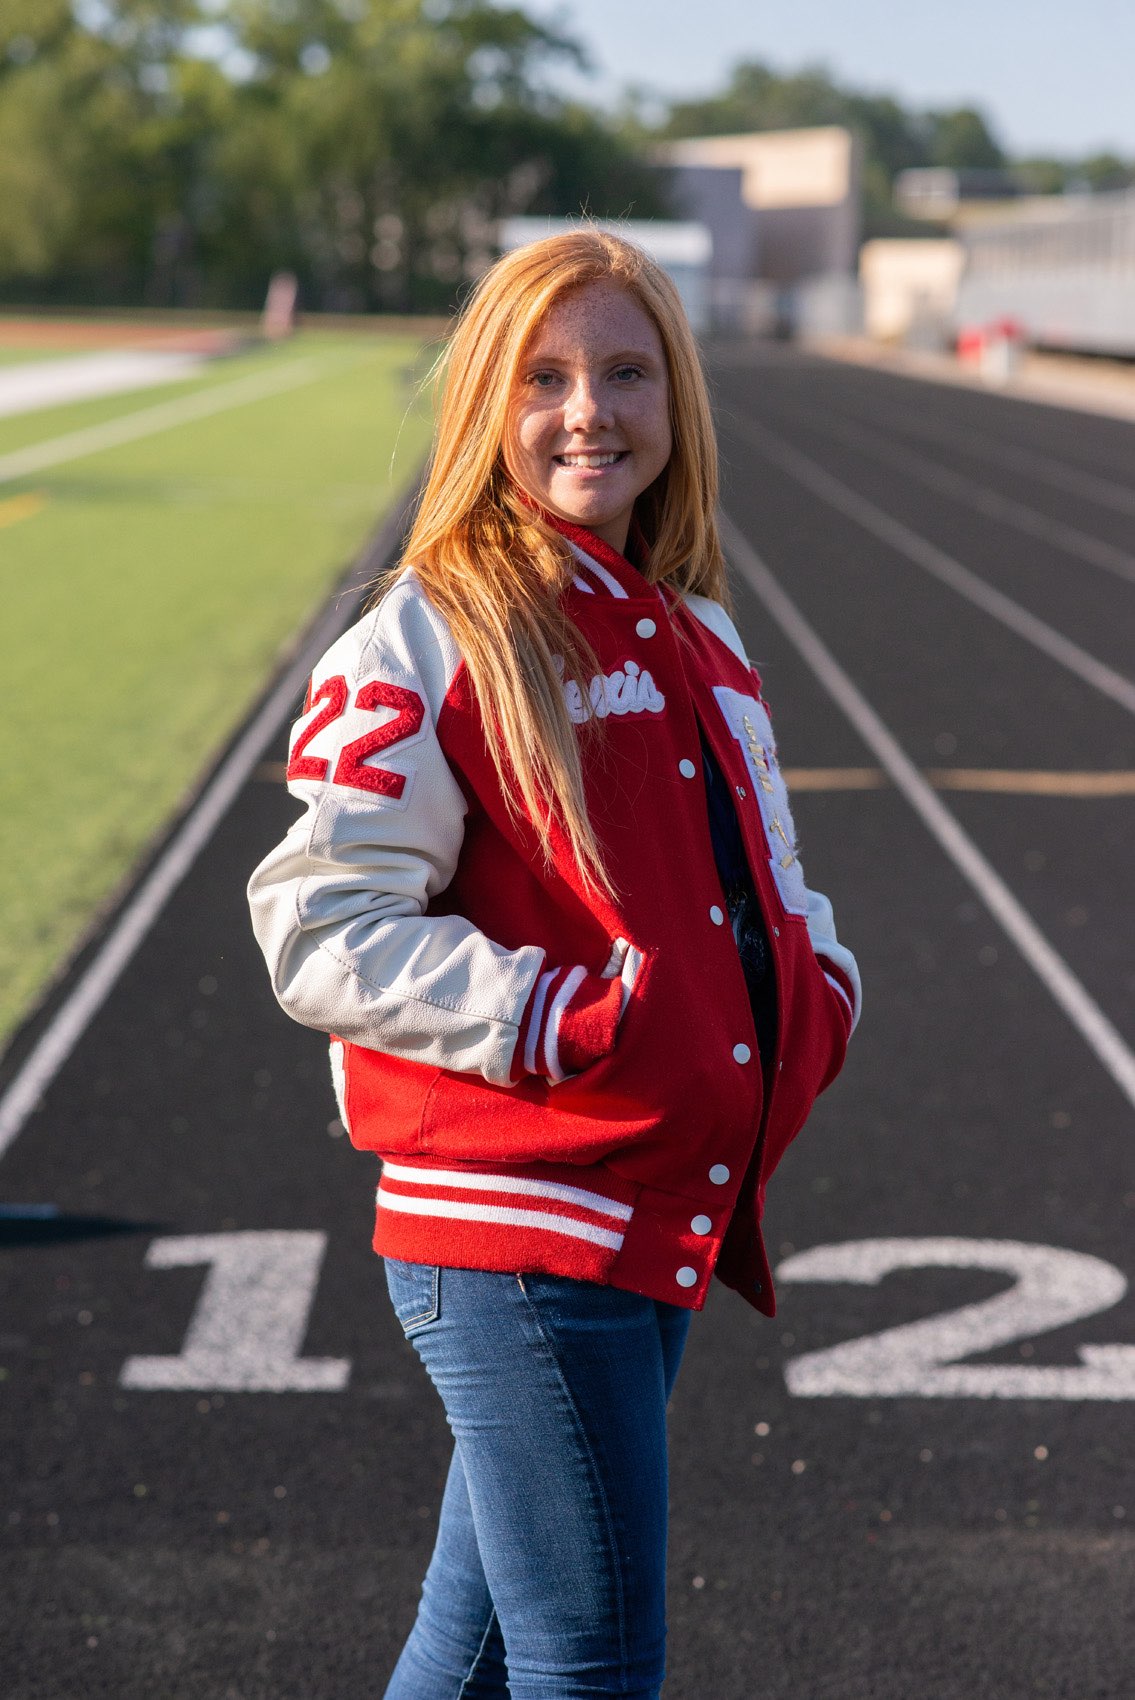 Senior girl in a letterman jacket standing on a track at her high school.